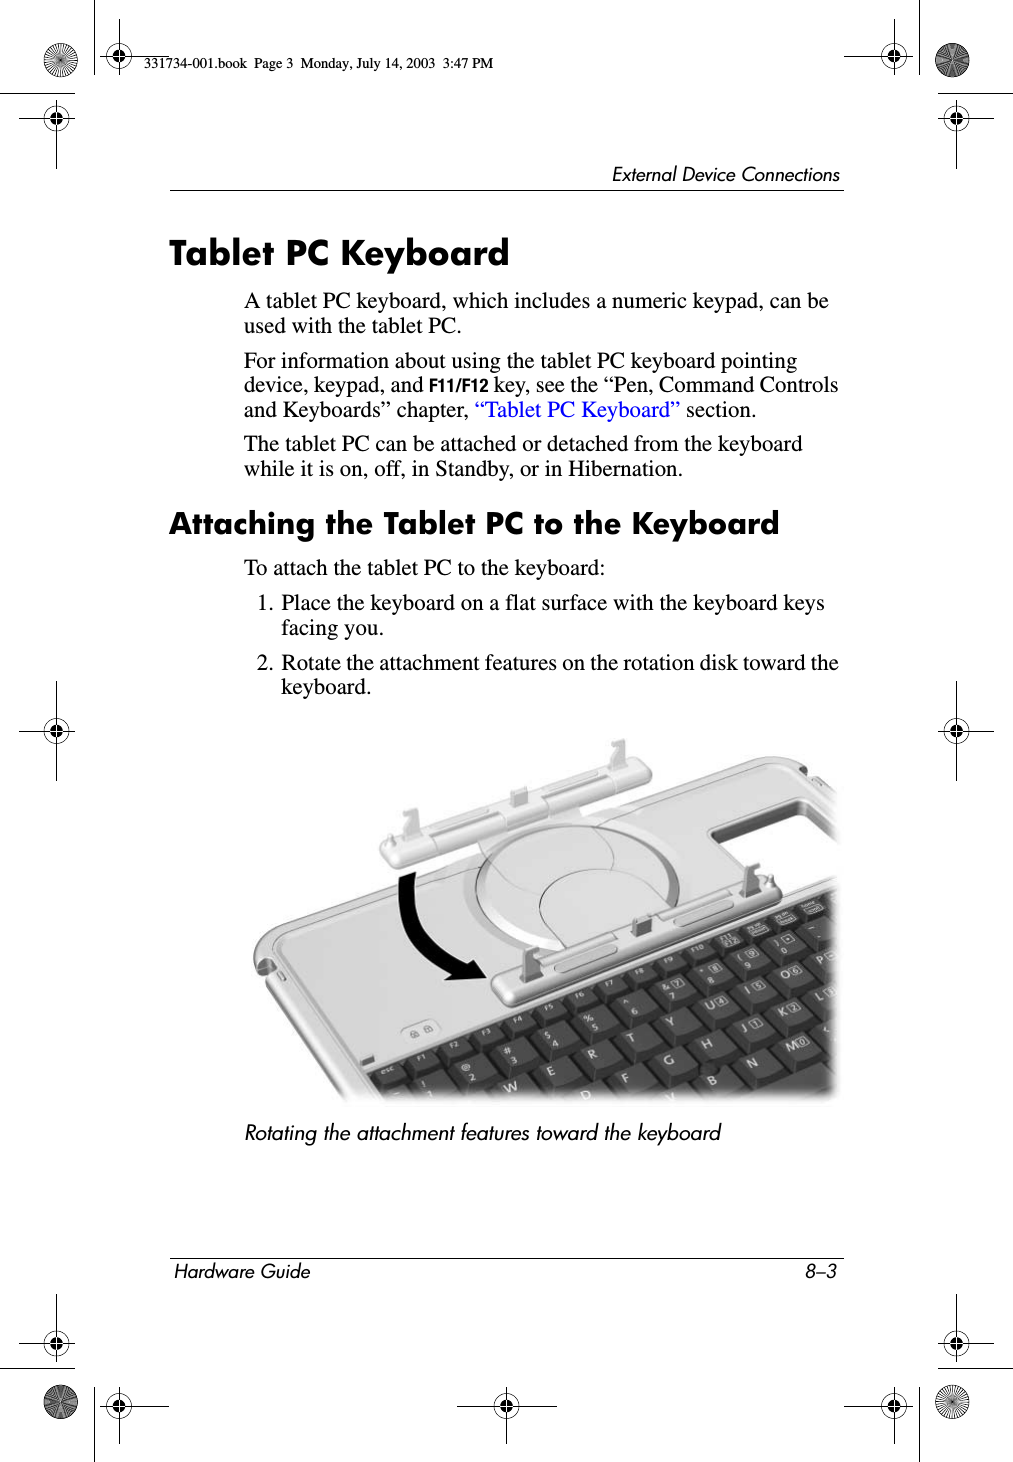 External Device ConnectionsHardware Guide 8–3Tablet PC KeyboardA tablet PC keyboard, which includes a numeric keypad, can be used with the tablet PC.For information about using the tablet PC keyboard pointing device, keypad, and F11/F12 key, see the “Pen, Command Controls and Keyboards” chapter, “Tablet PC Keyboard” section.The tablet PC can be attached or detached from the keyboard while it is on, off, in Standby, or in Hibernation.Attaching the Tablet PC to the KeyboardTo attach the tablet PC to the keyboard:1. Place the keyboard on a flat surface with the keyboard keys facing you.2. Rotate the attachment features on the rotation disk toward the keyboard.Rotating the attachment features toward the keyboard331734-001.book  Page 3  Monday, July 14, 2003  3:47 PM